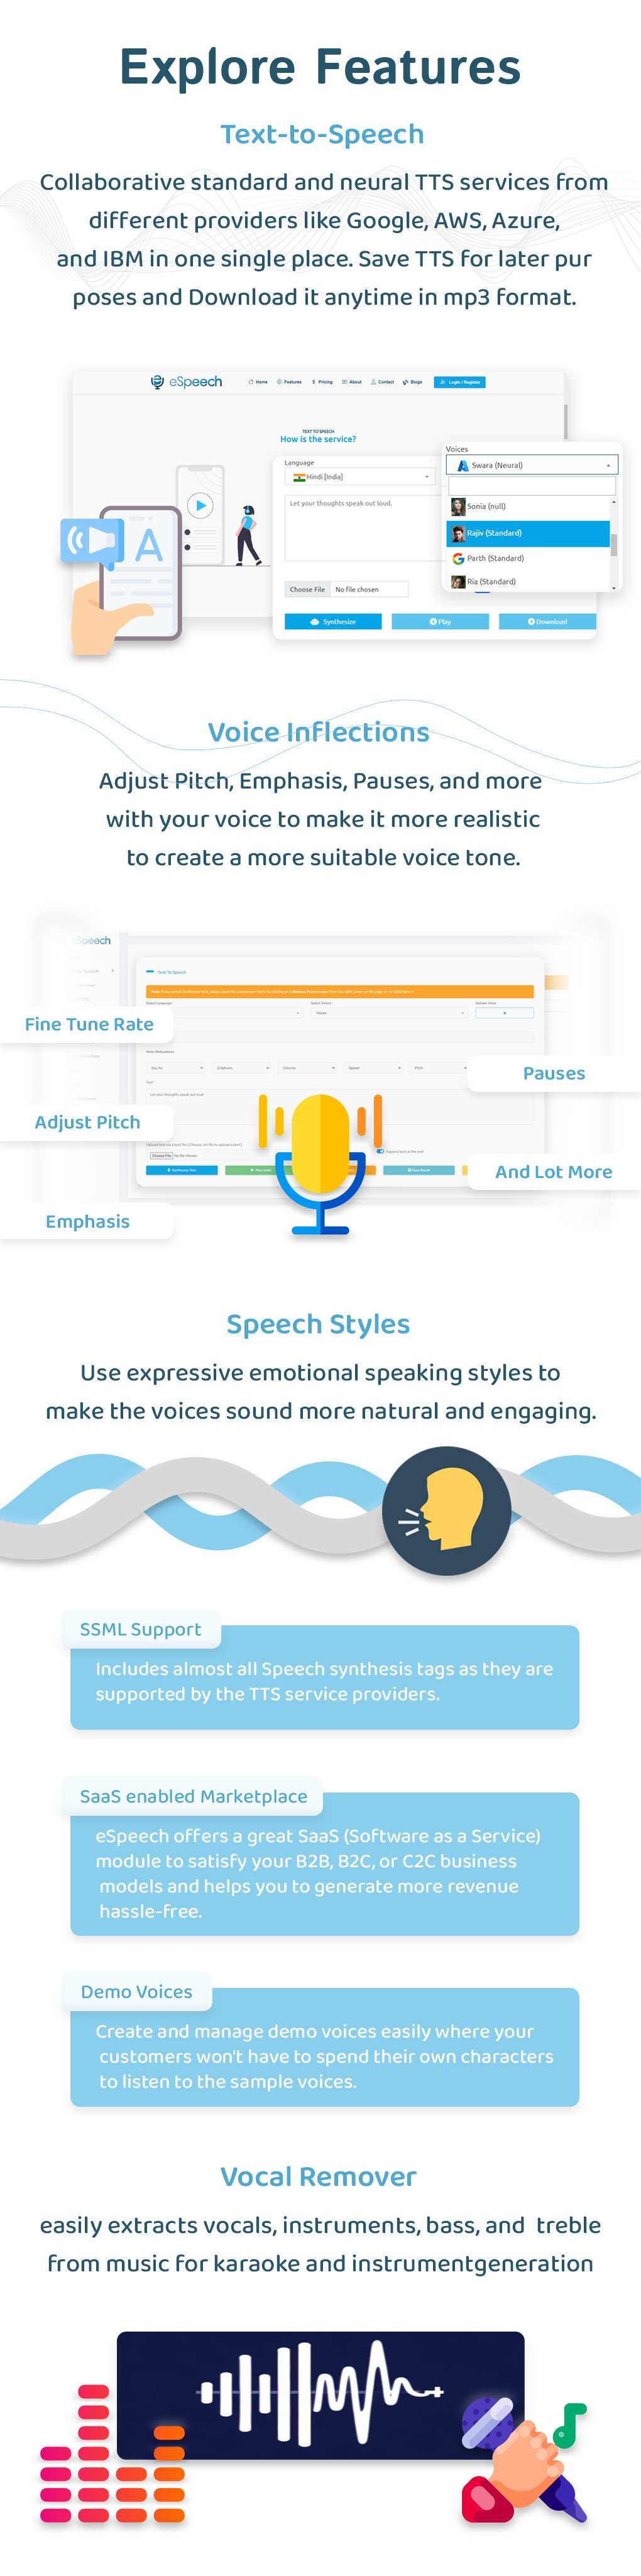 eSpeech Explore Features - text to speech marketplace with SaaS module